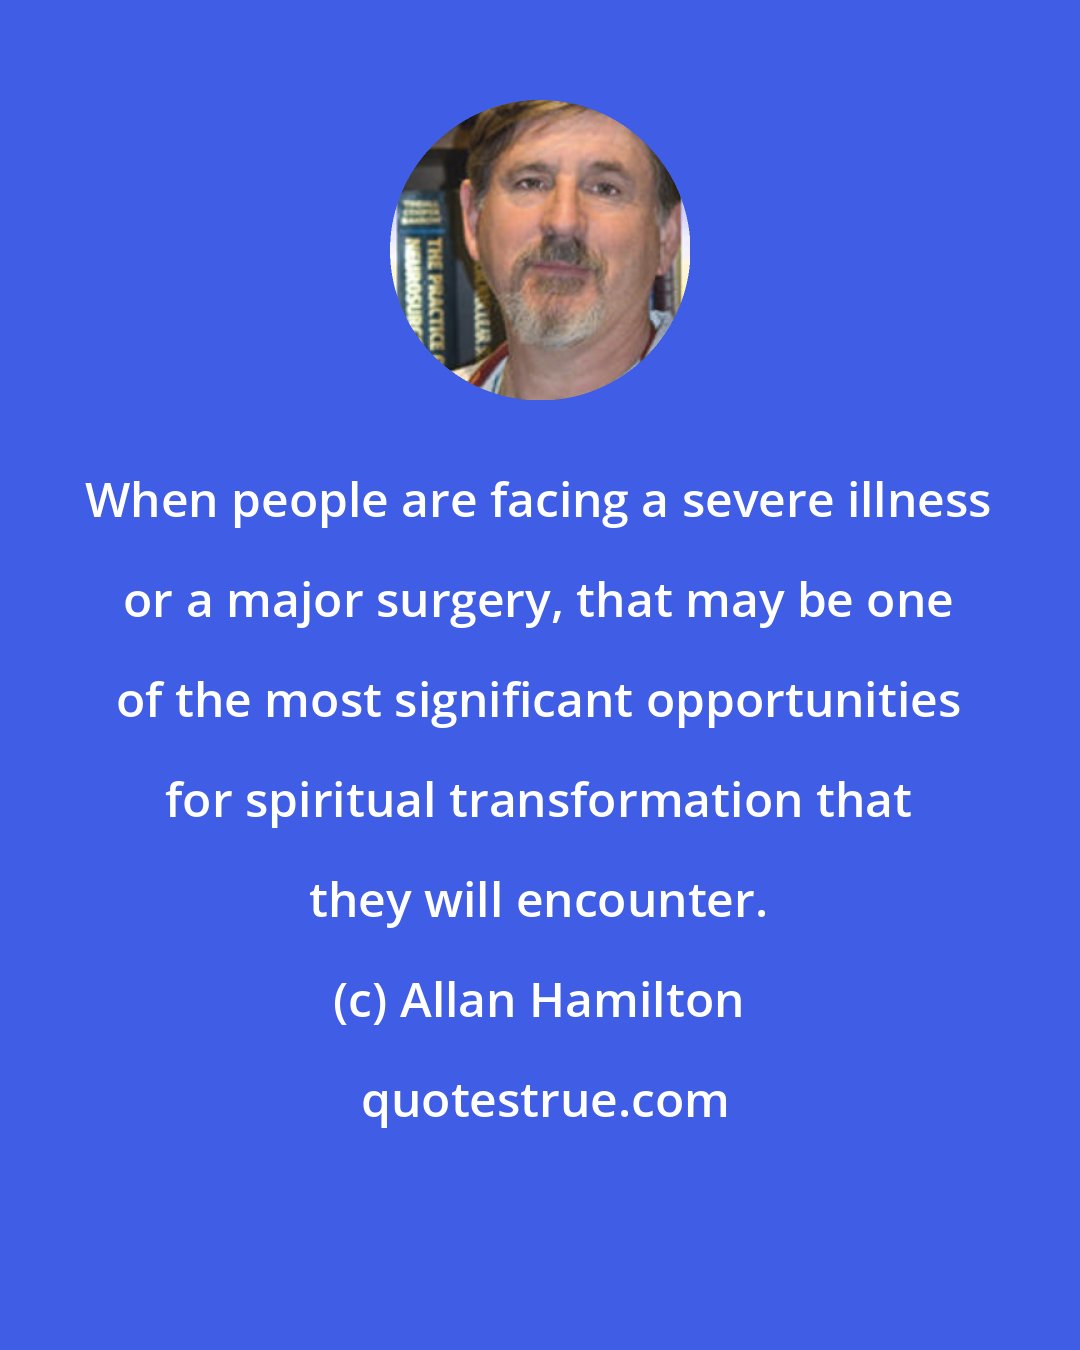 Allan Hamilton: When people are facing a severe illness or a major surgery, that may be one of the most significant opportunities for spiritual transformation that they will encounter.